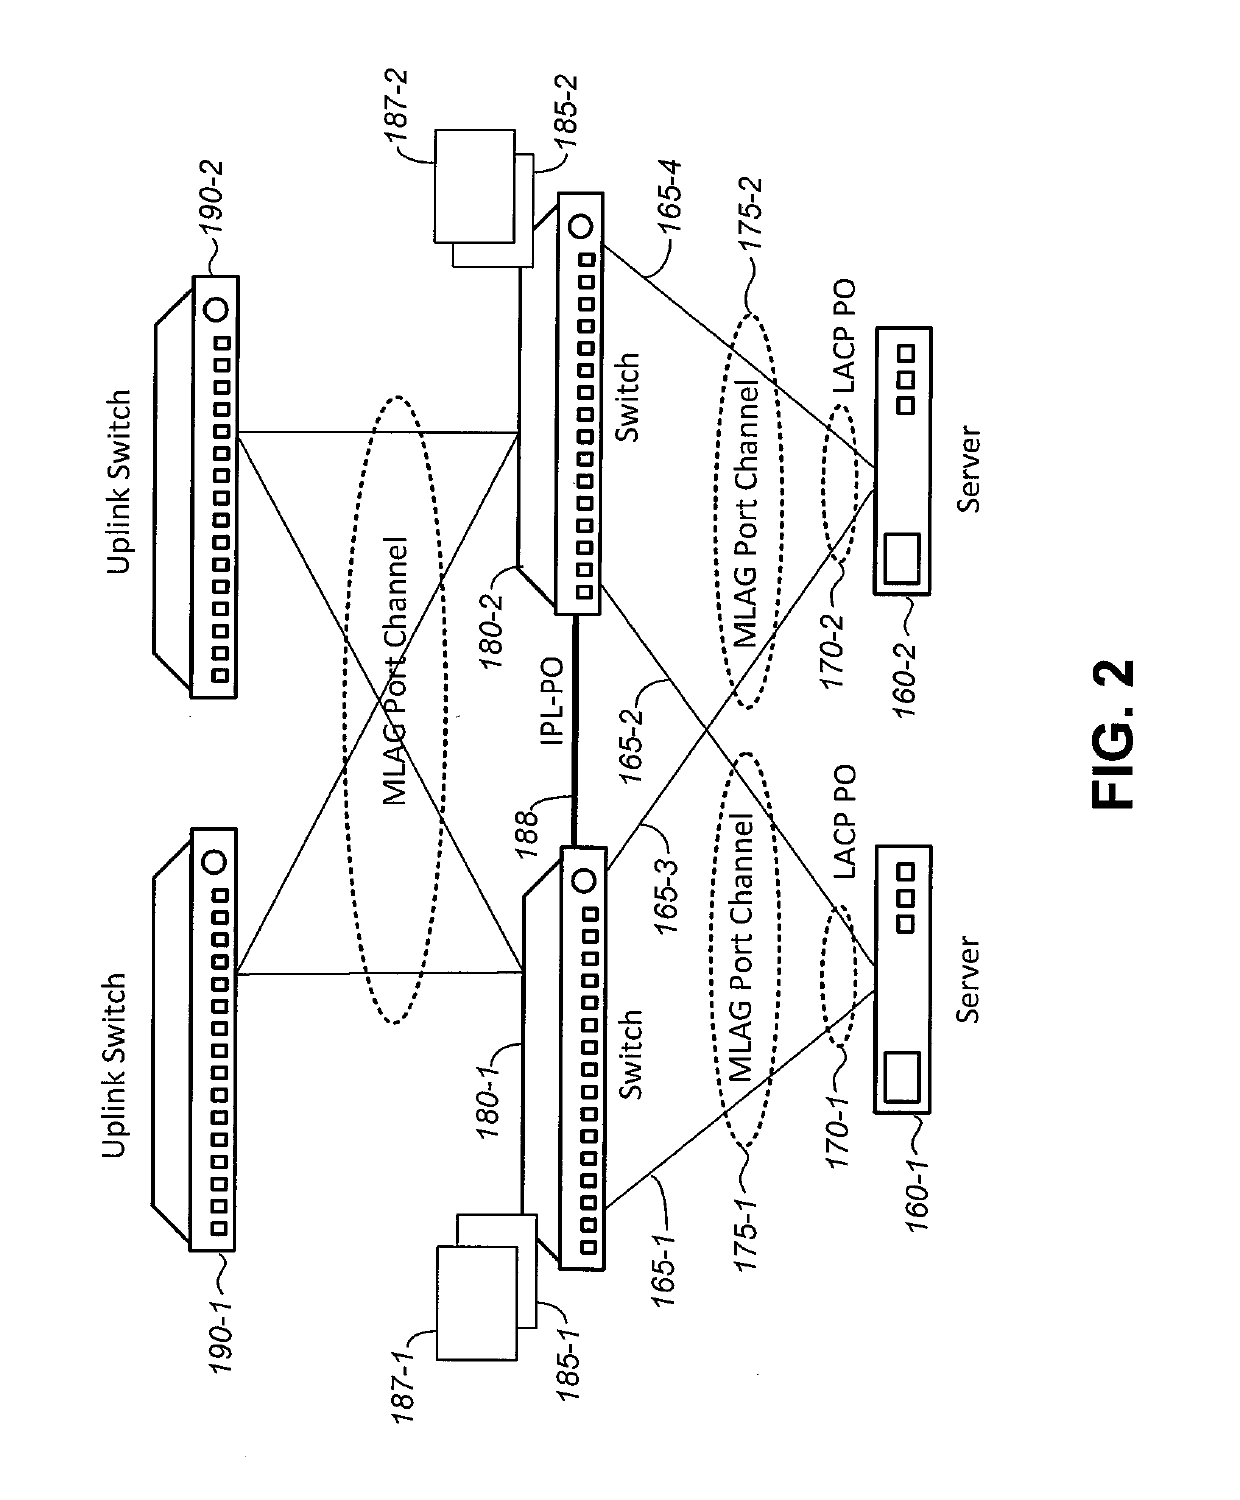 Automatic multi-chassis link aggregation configuration with link layer discovery